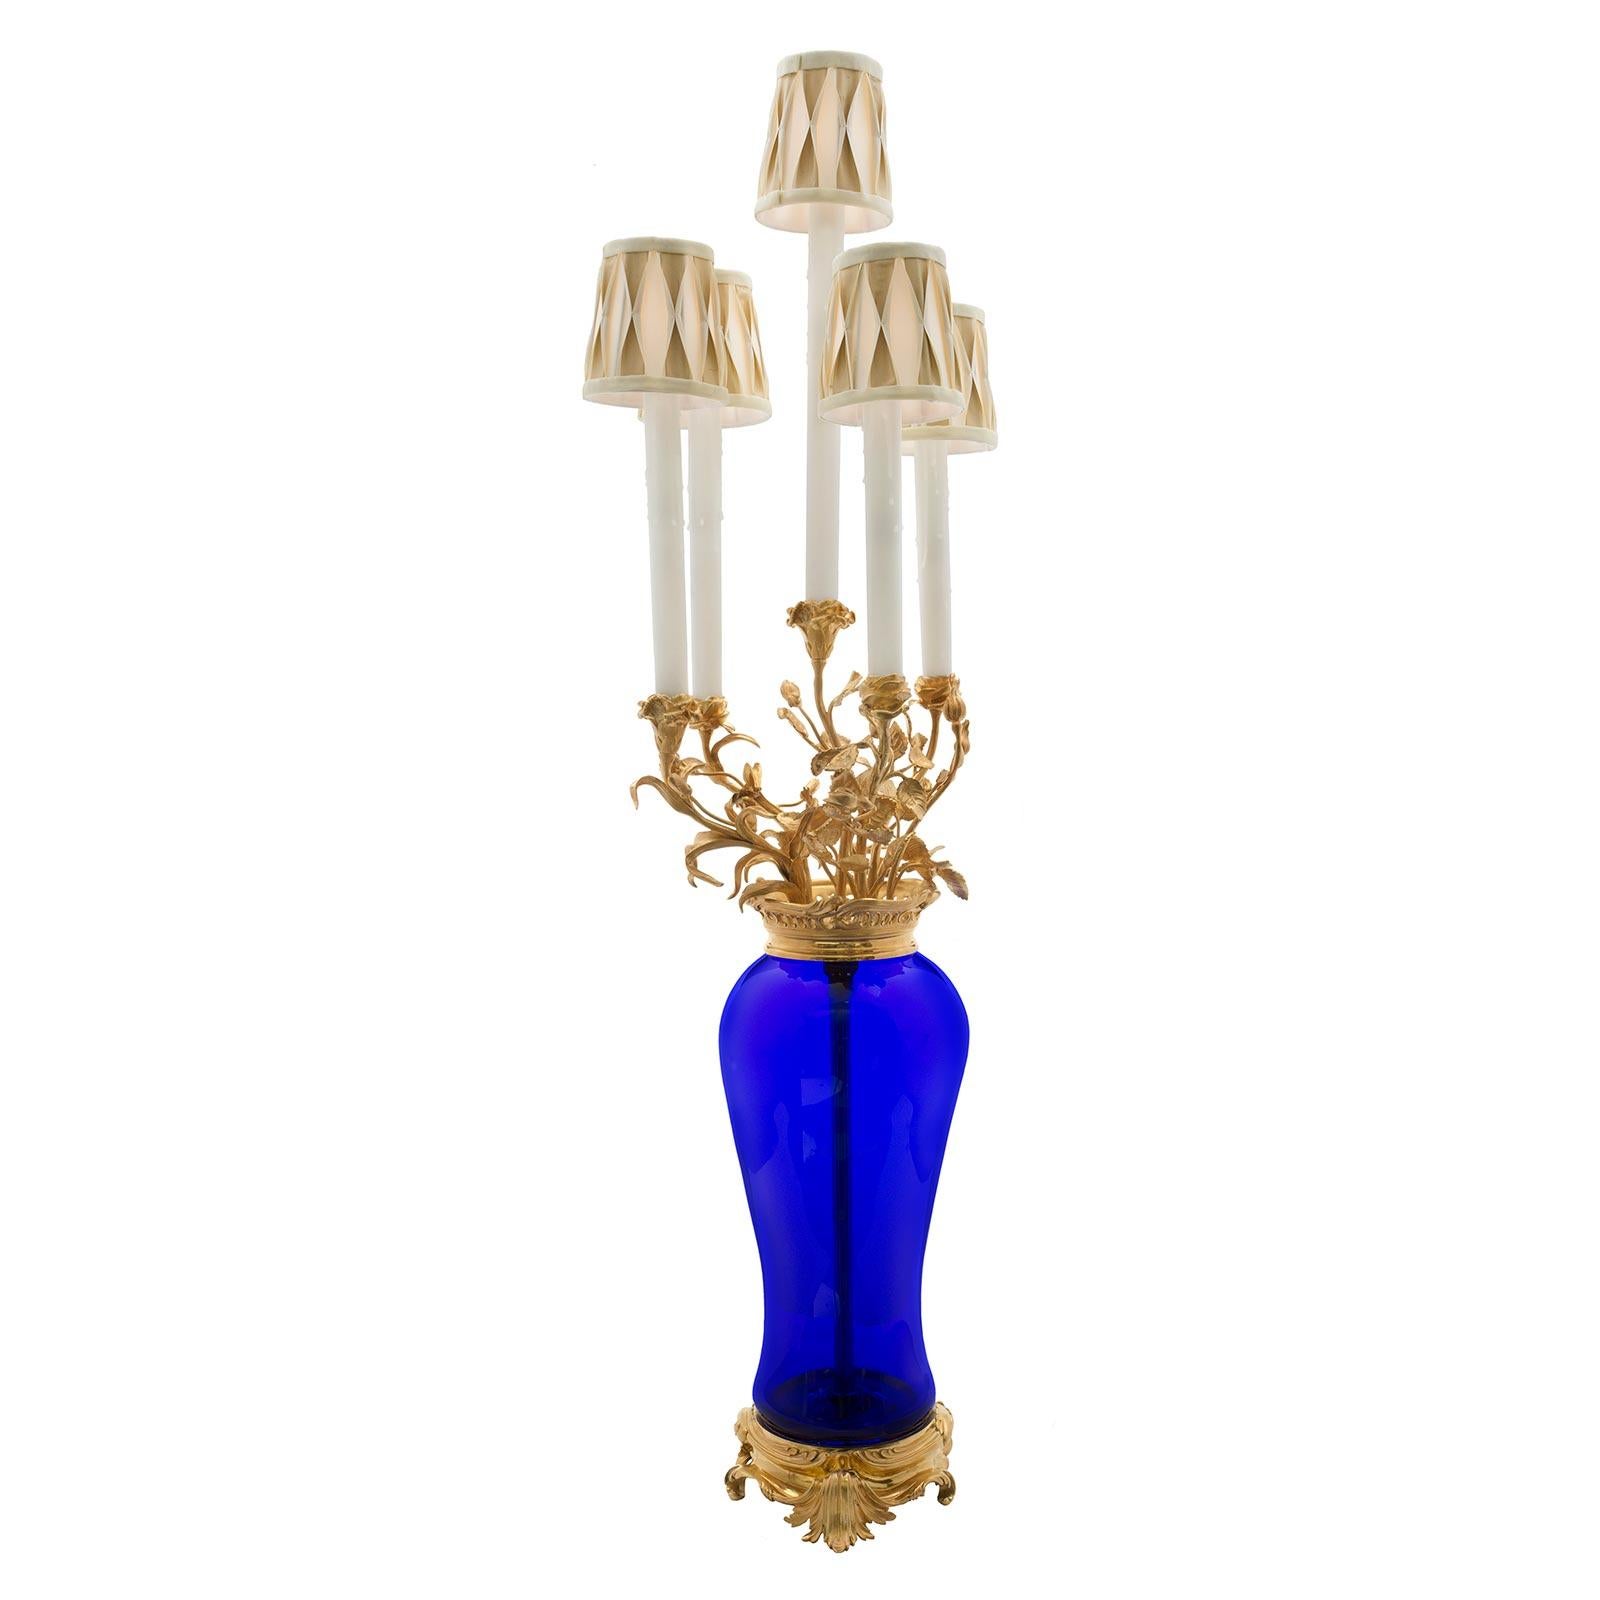 A beautiful French 19th century Louis XVI st. hand blown cobalt blue glass and ormolu candelabra mounted into a lamp. The lamp is raised by an elegant foliate designed ormolu base below the slender hand blown cobalt blue glass body. Above a pierced